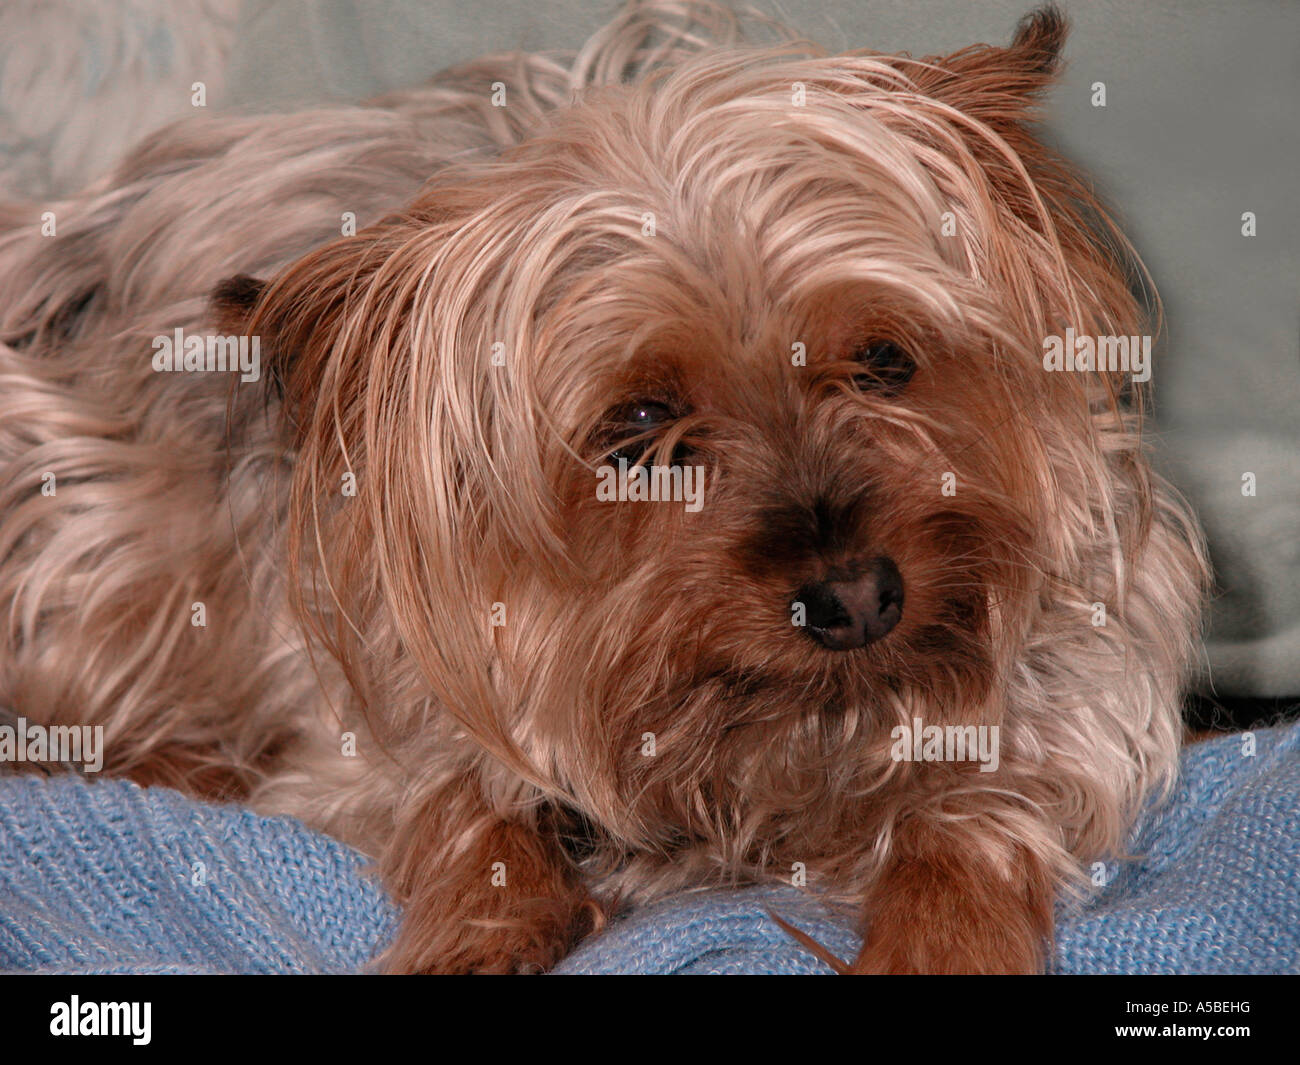 Yorkshire Terrier dog looking cute Stock Photo